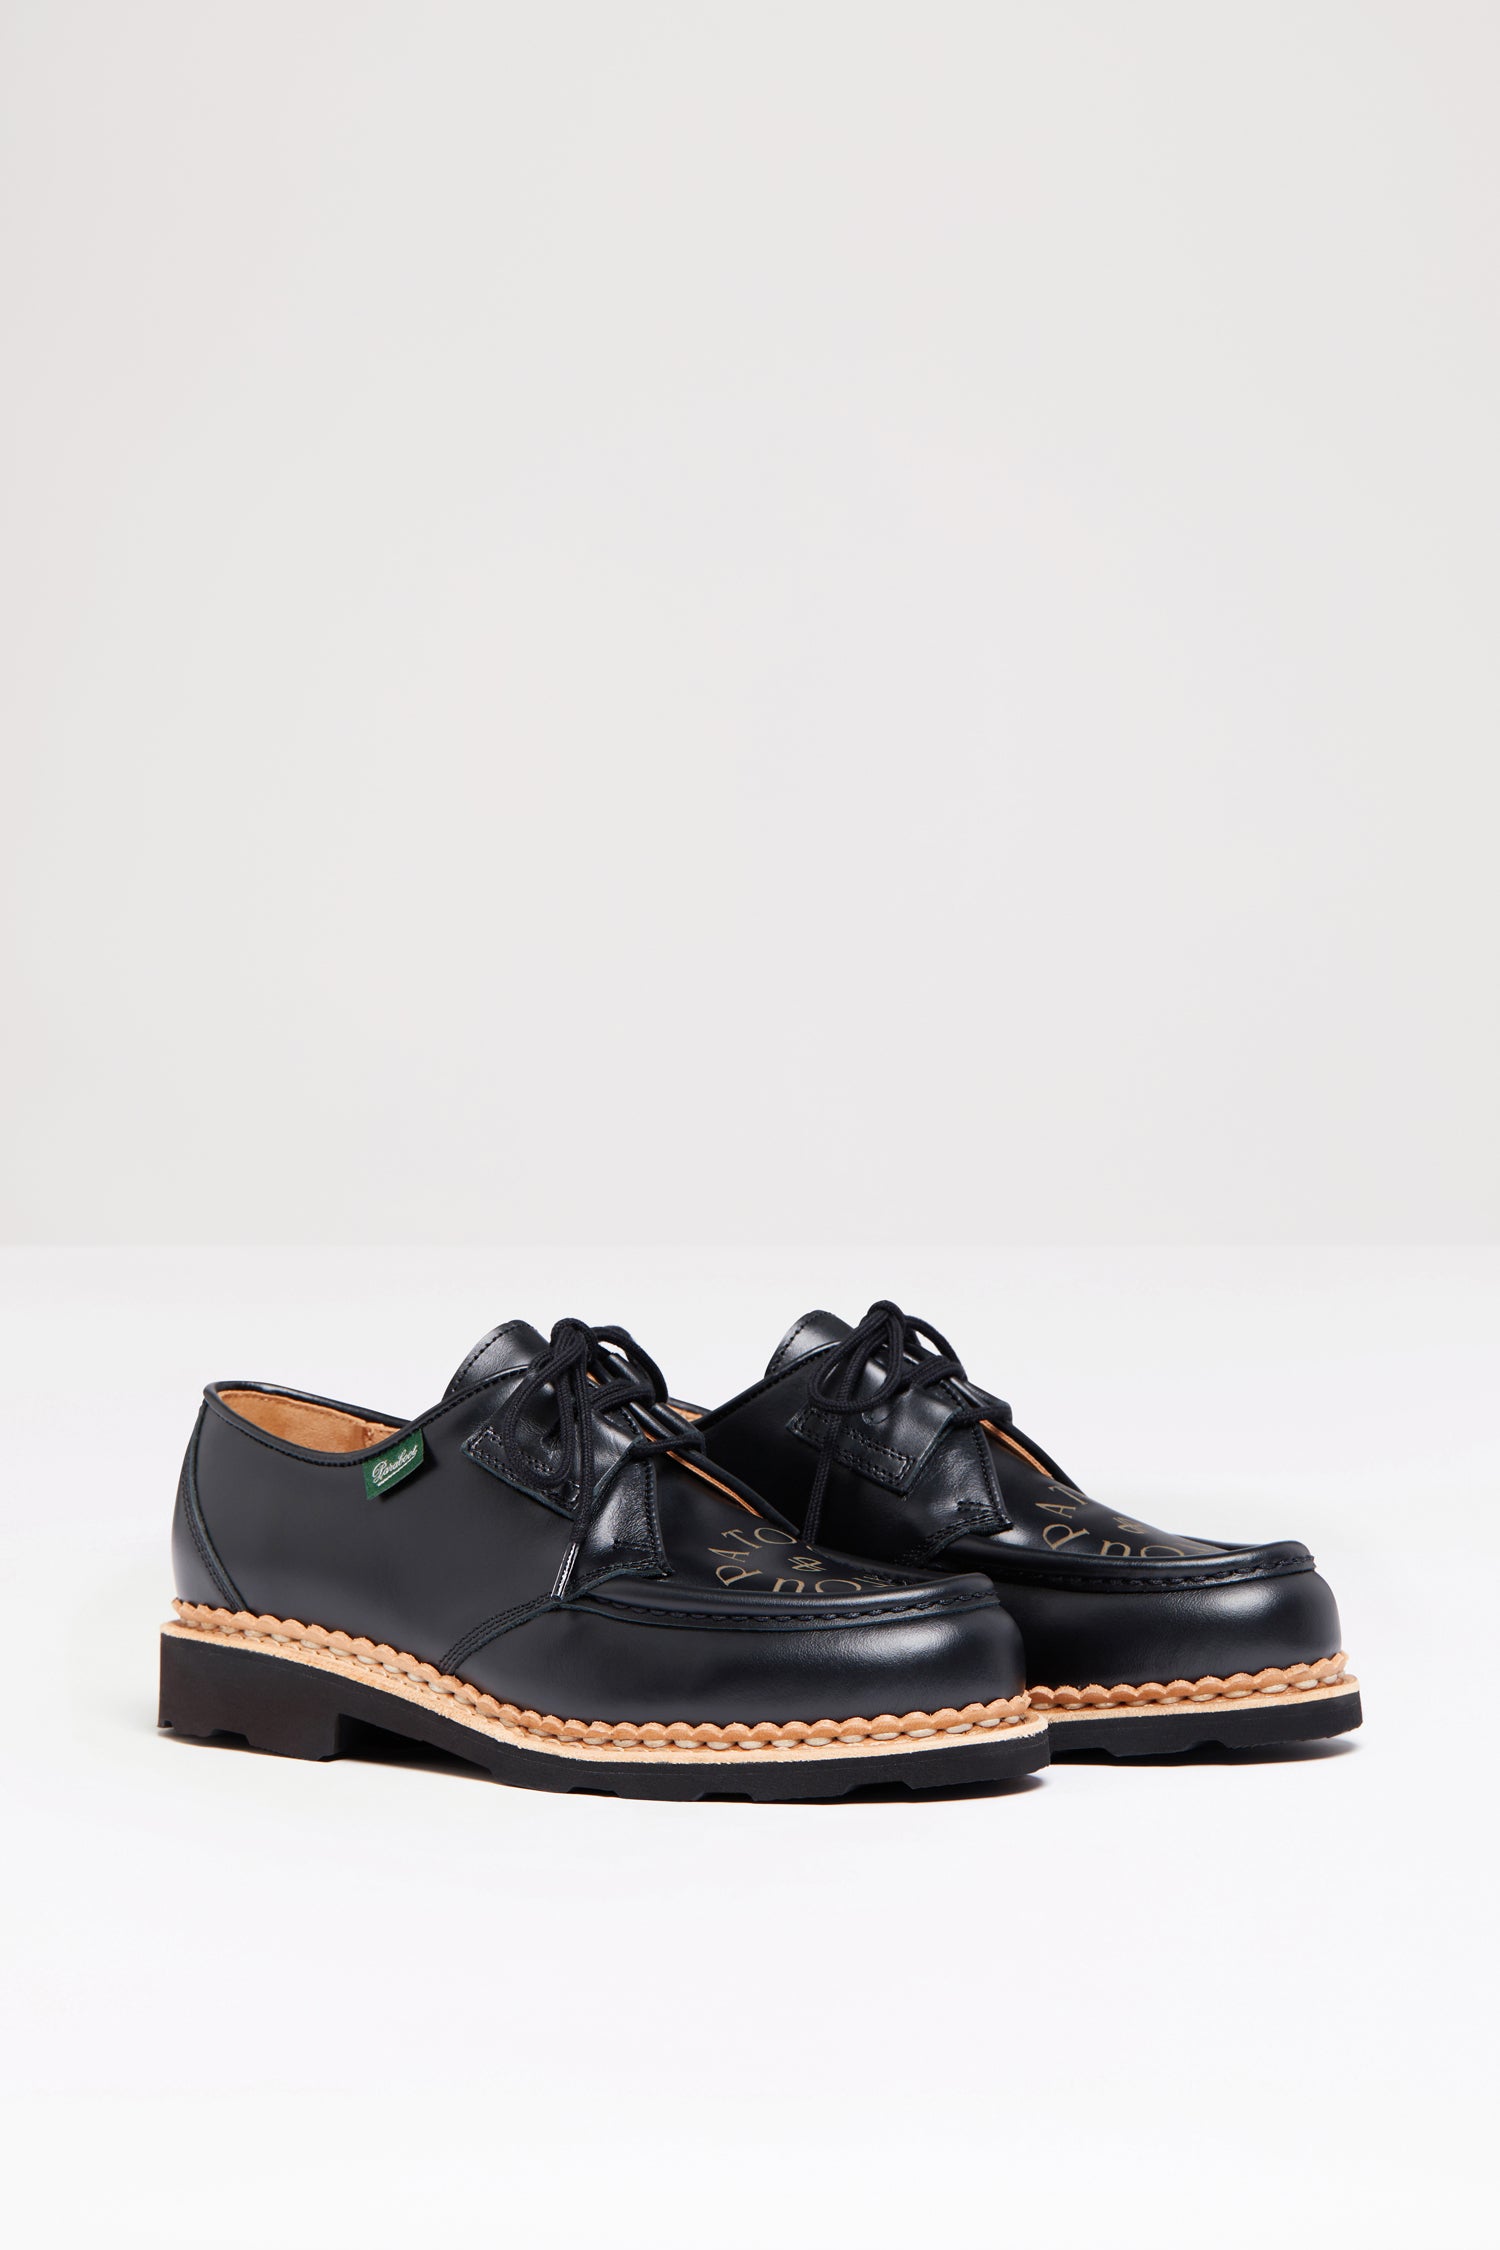 Patou | PATOU x Paraboot lace-ups in leather